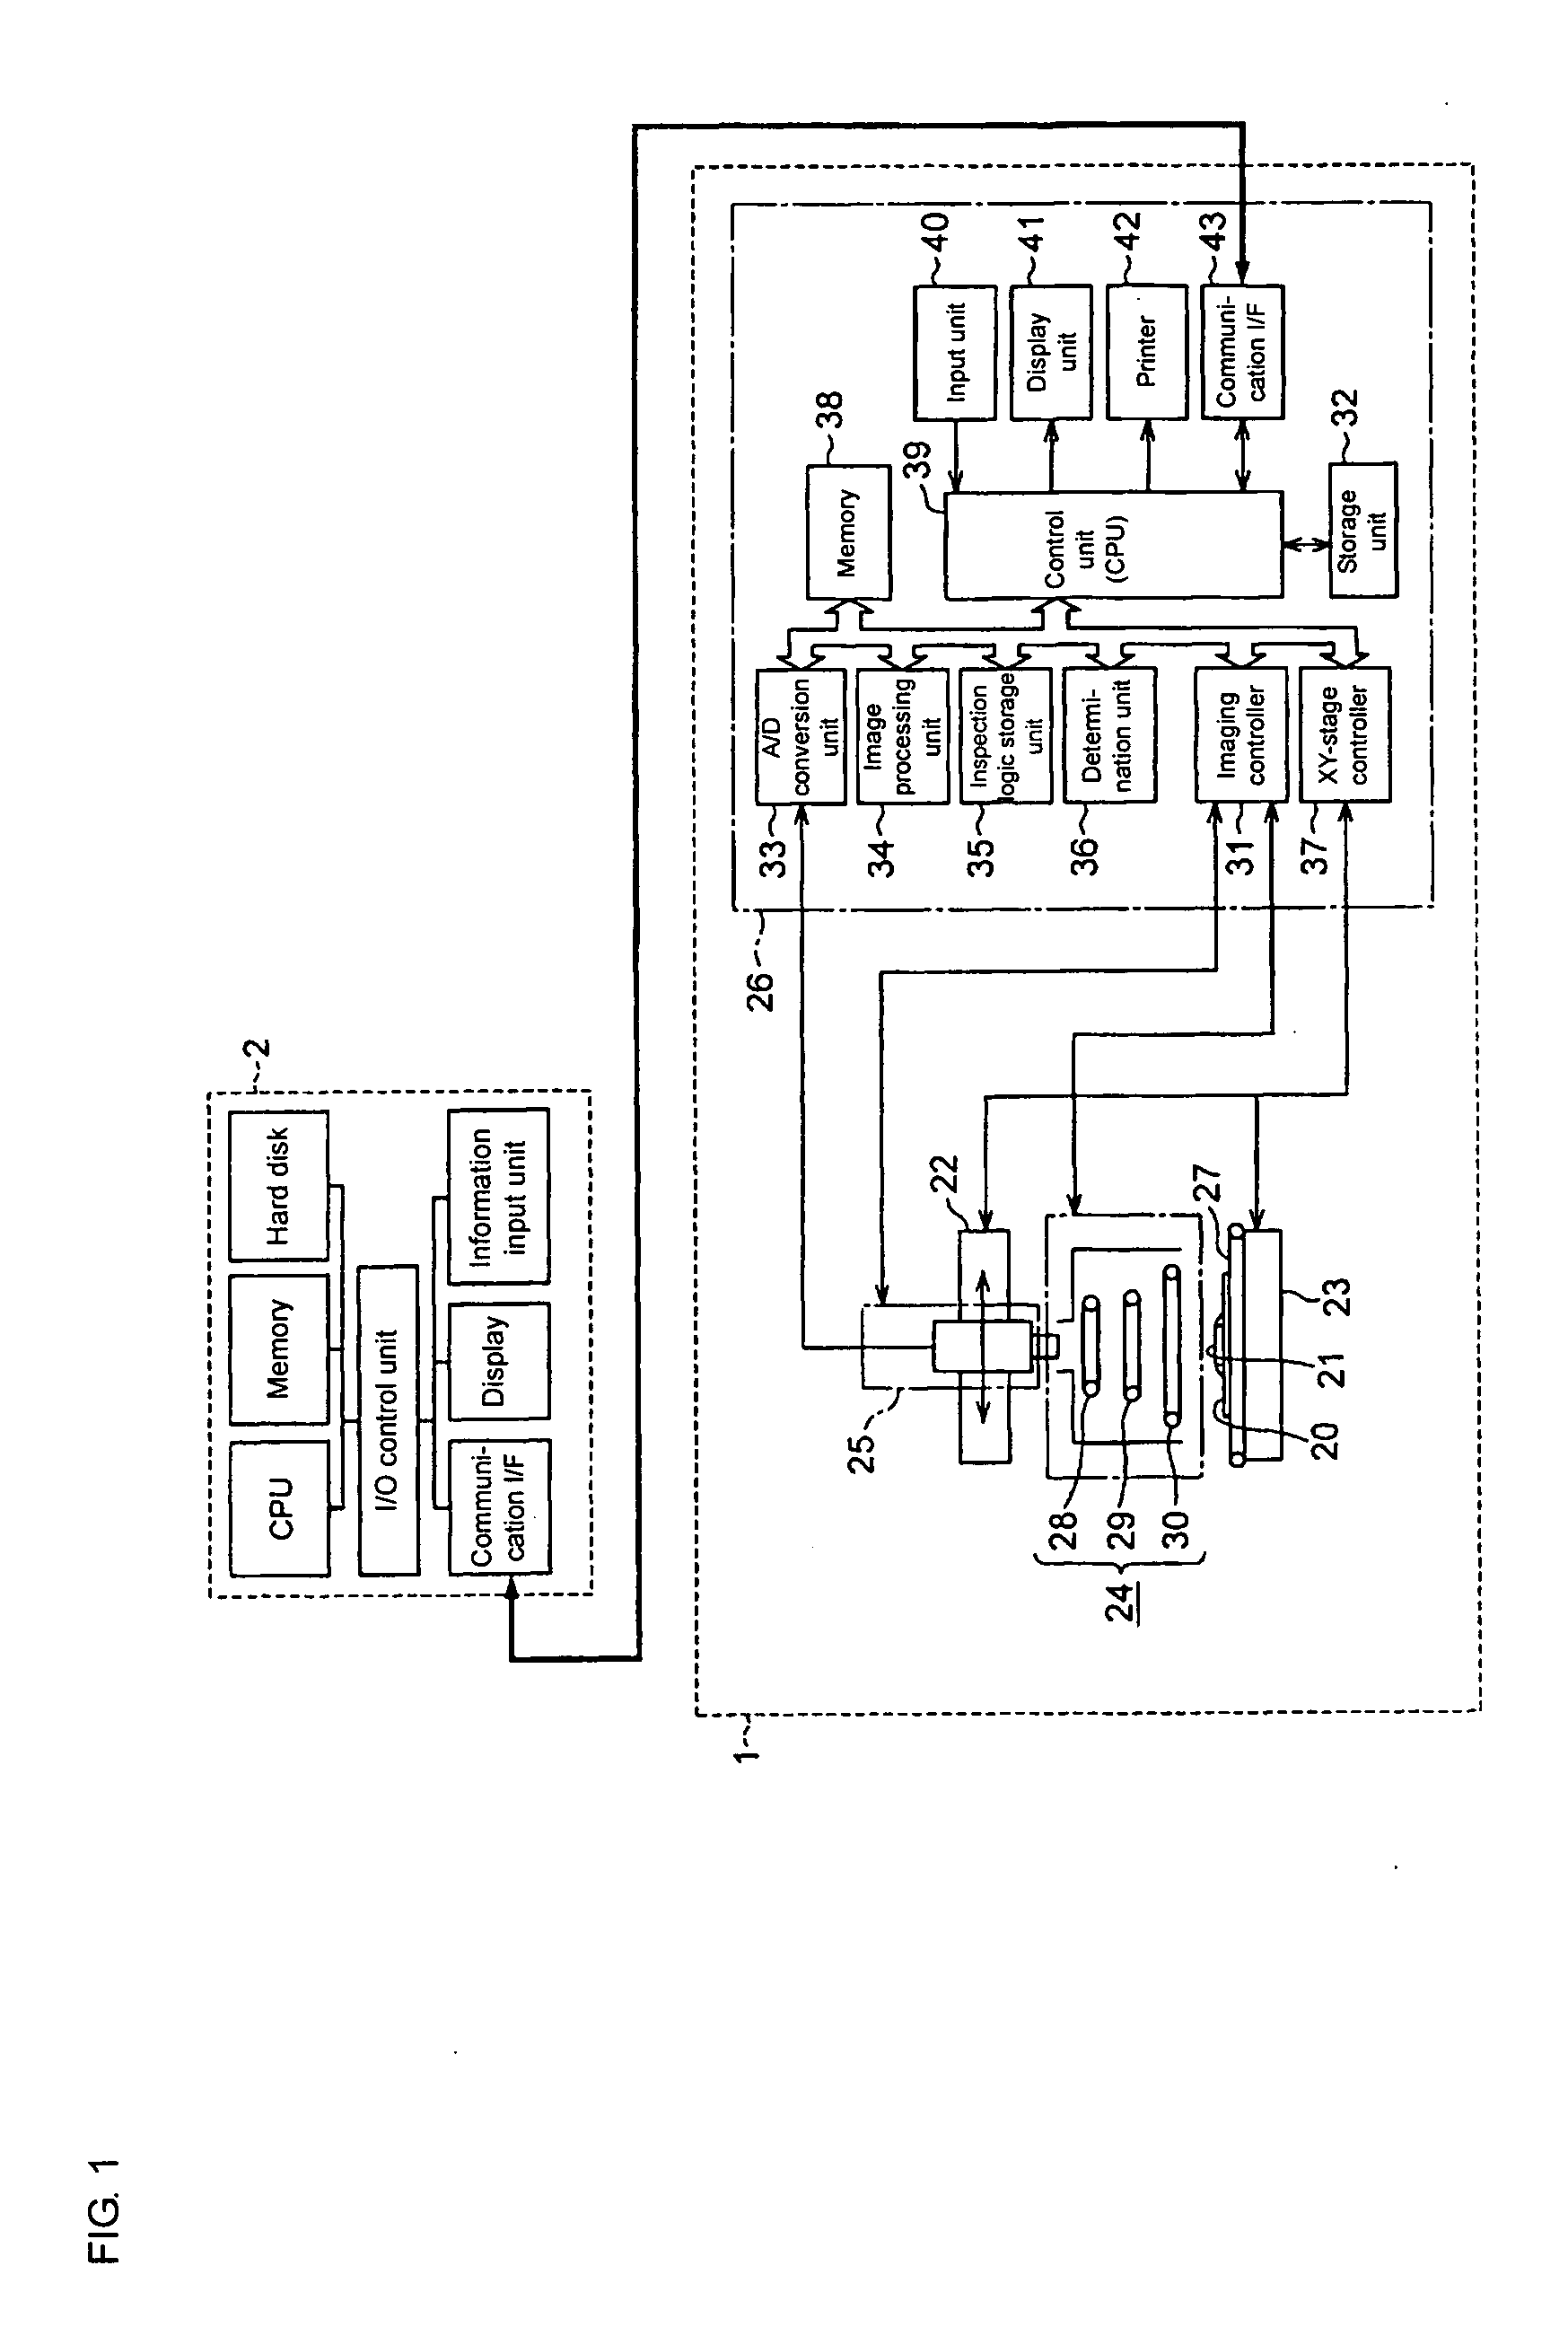 Board inspection apparatus and method and apparatus for setting inspection logic thereof